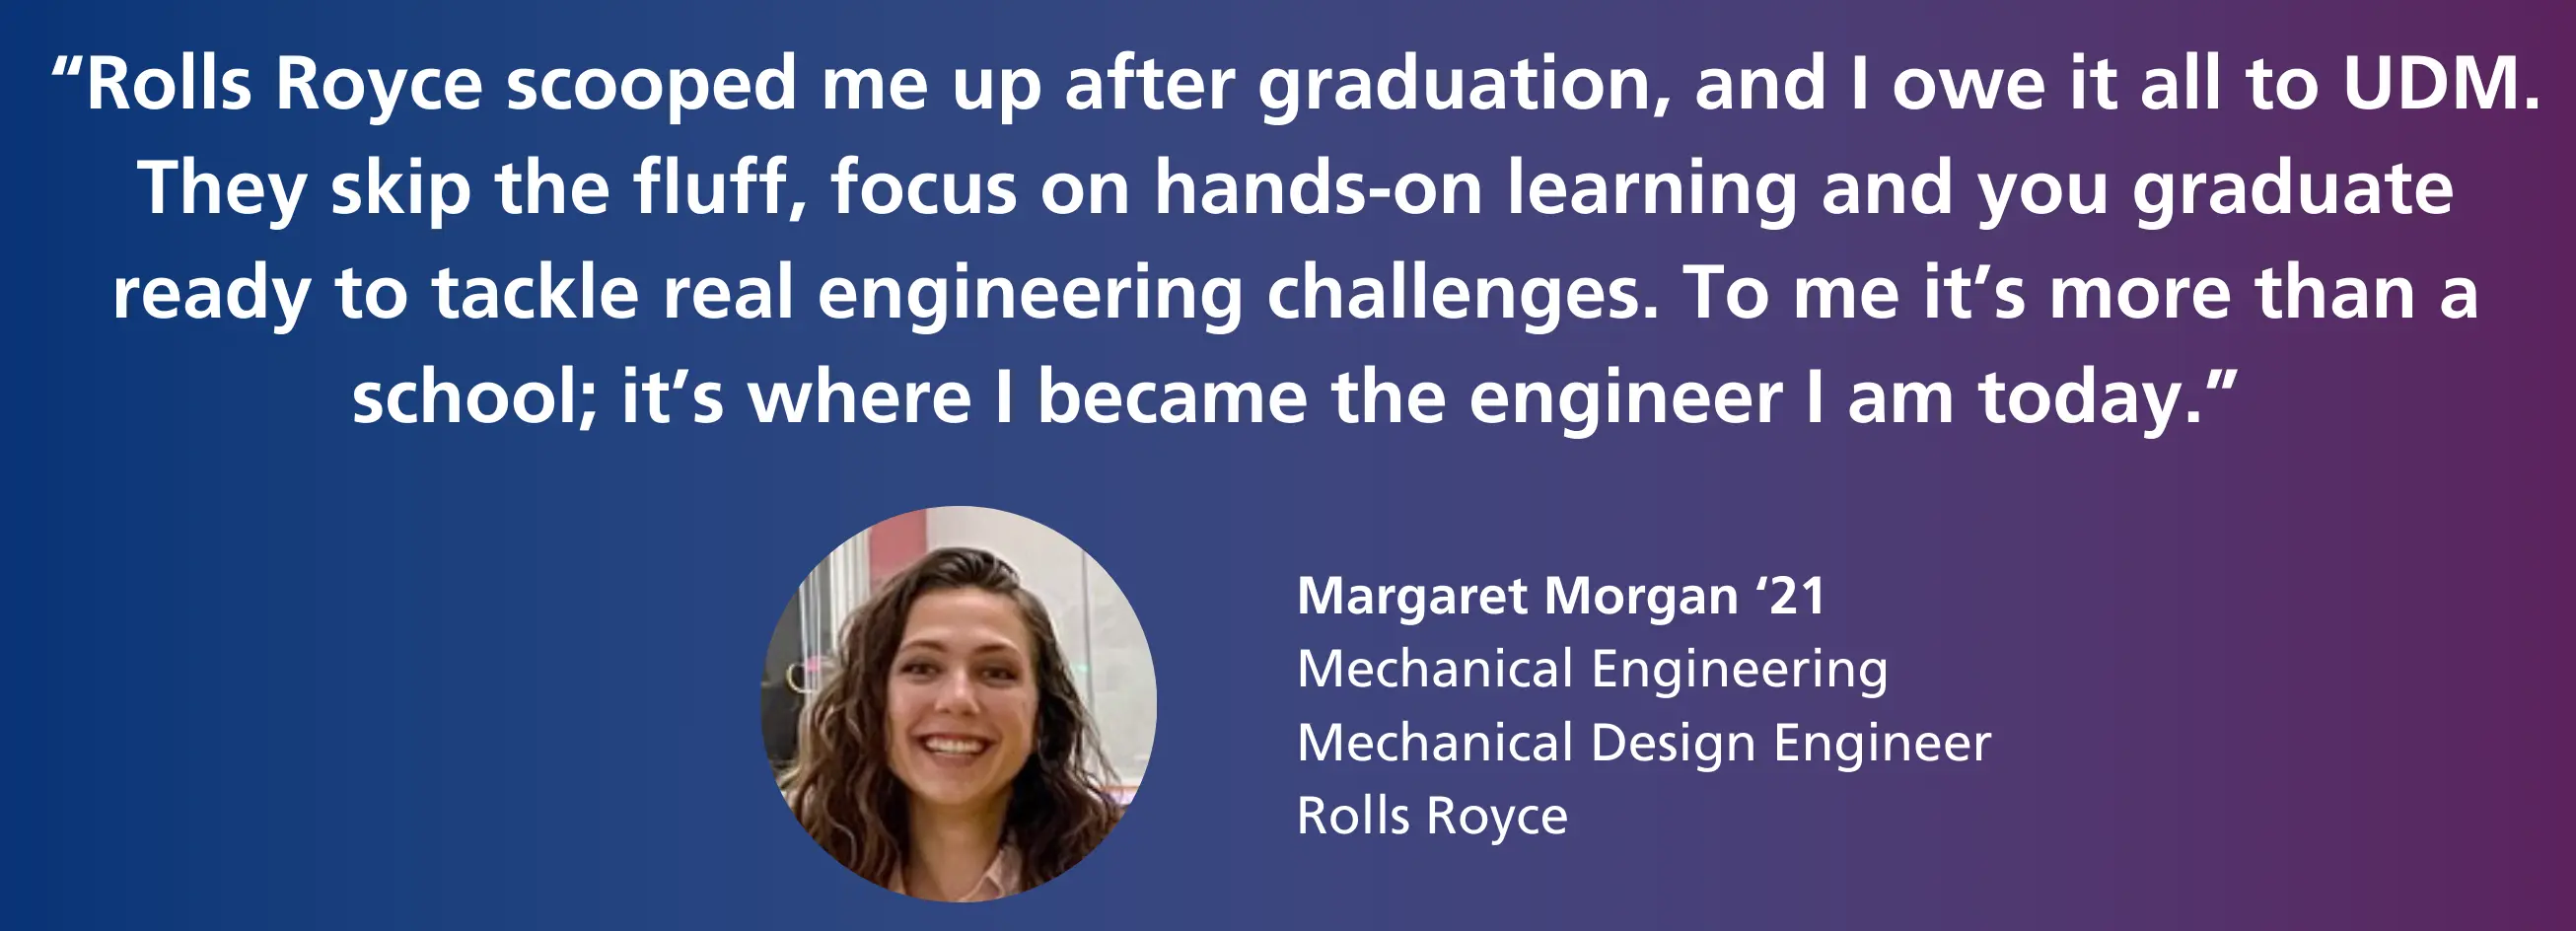 "Rolls Royce scooped me up after graduation, and I owe it all to UDM. They skip the fluff, focus on hands-on learning and you graduate ready to tackle real engineering challenges. To me it's more than a school; it's where I became the engineer I am today." - Margaret Morgan '21